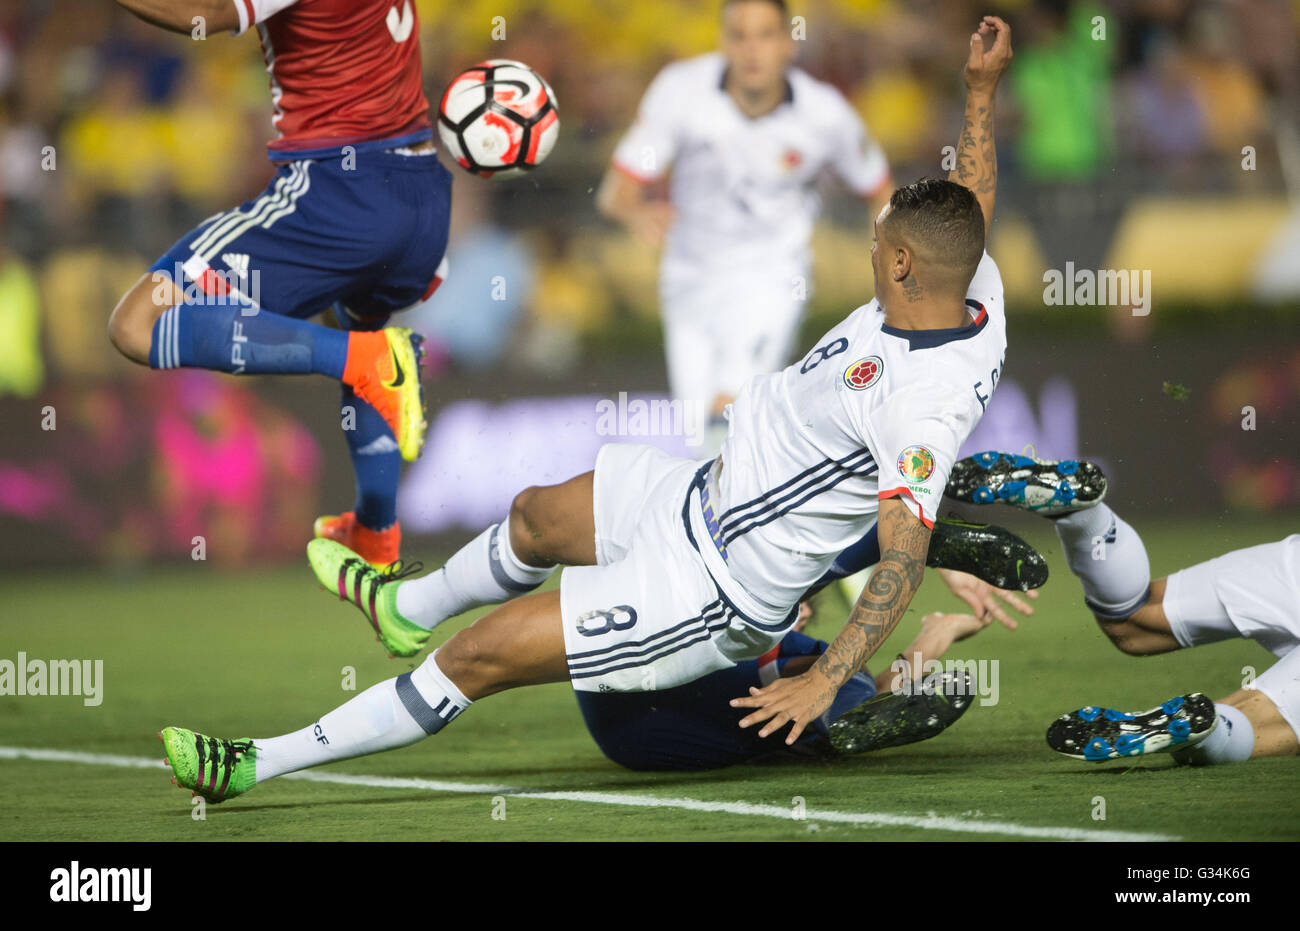 Pasadena, USA. 7th June, 2016. Colombia's Edwin Cardona (C) makes a save during the Copa America Centenario Group A match between Colombia and Paraguay at Rose Bowl Stadium in Pasadena, California, the United States, June 7, 2016. © Yang Lei/Xinhua/Alamy Live News Stock Photo